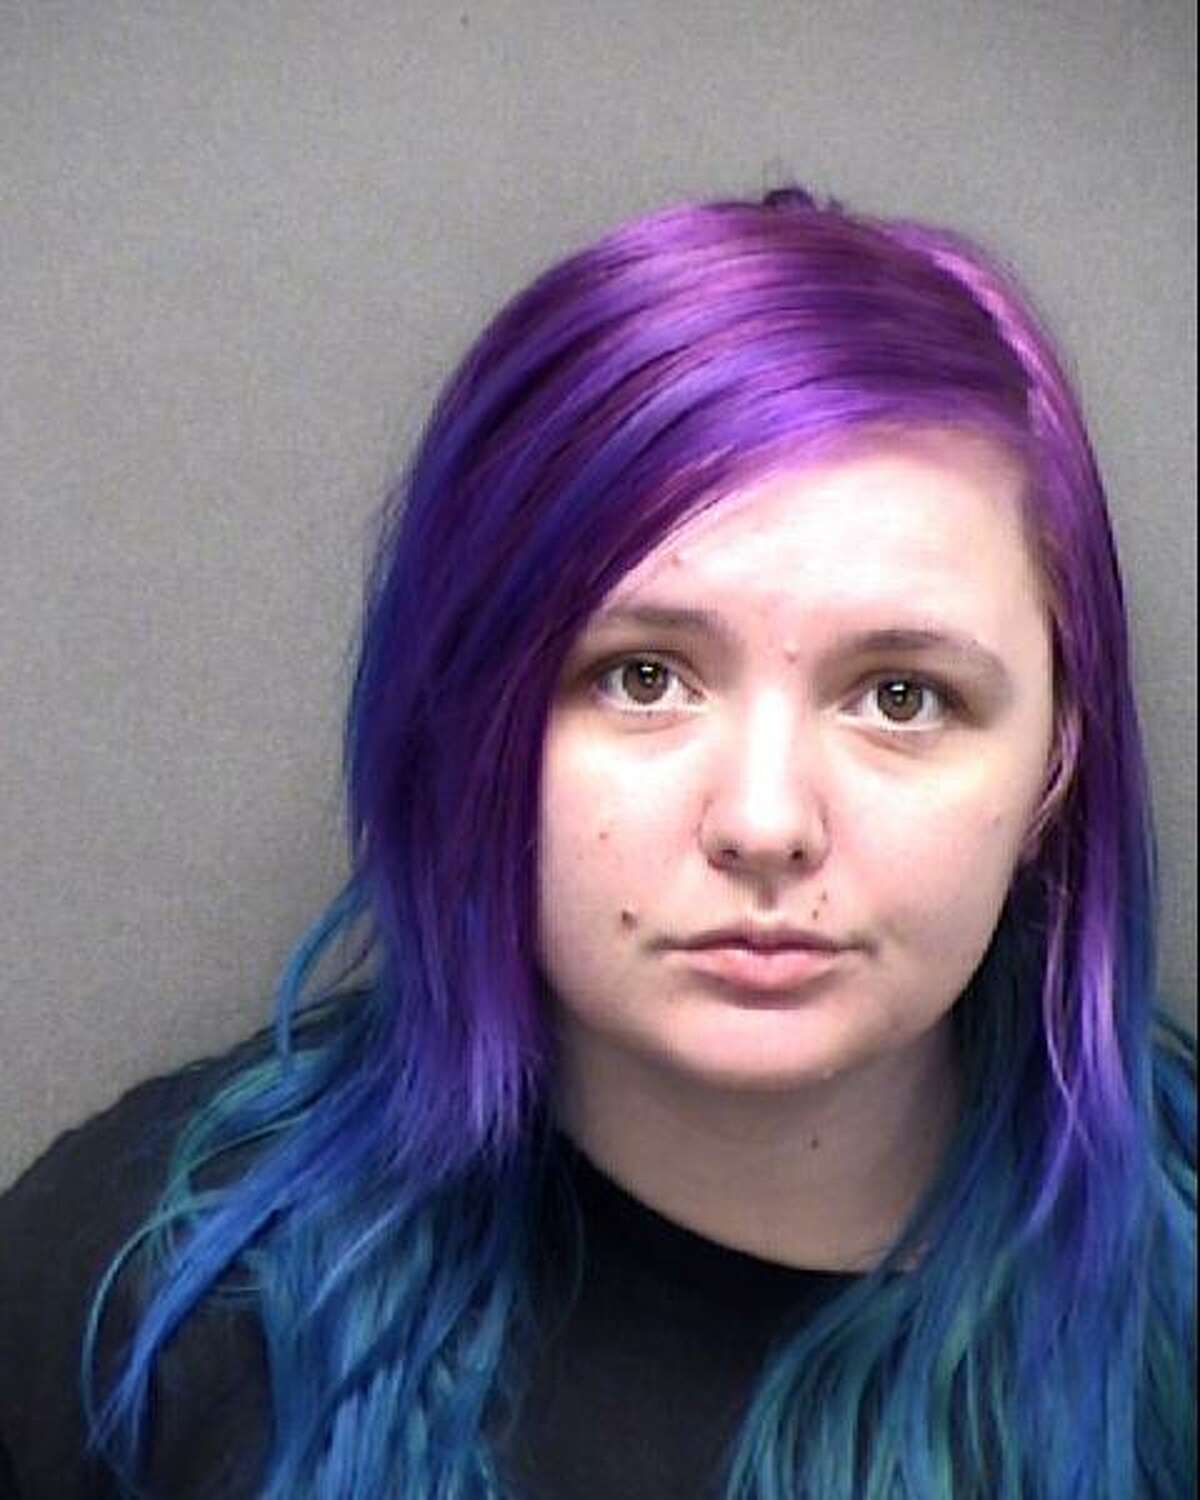 Stacy Mae Lynn Page, 27, was indicted on counts of murder and engaging in organized criminal activity.